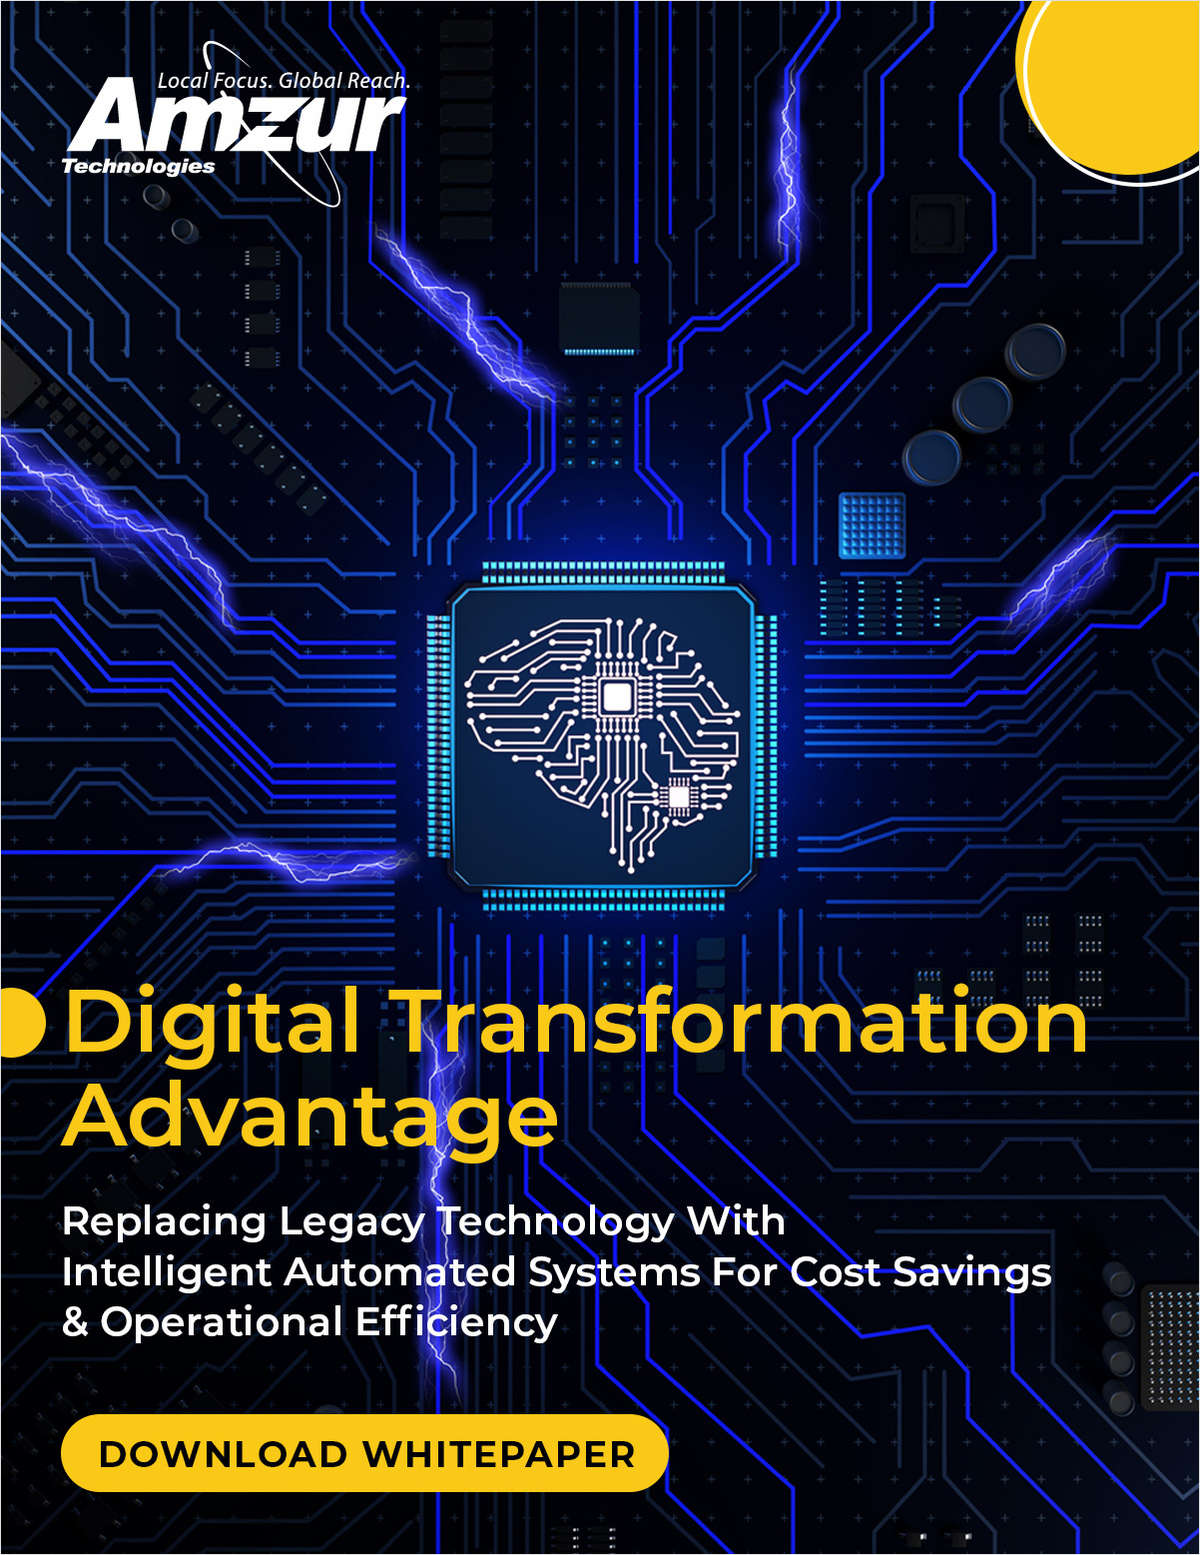 Digital Transformation For Cost Savings And Operational Efficiency